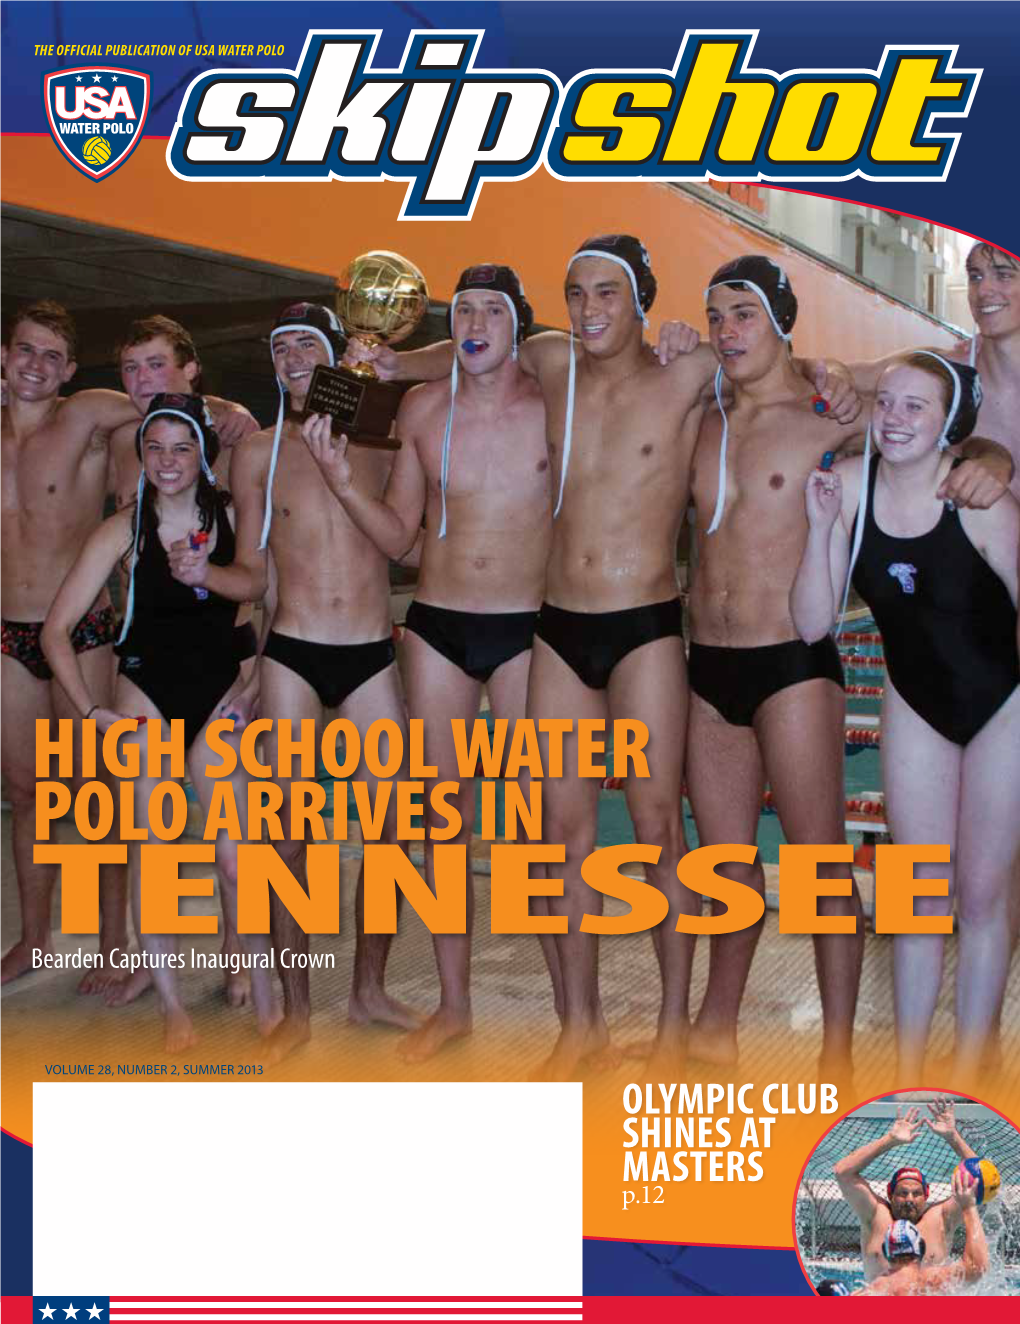 High School Water Polo Arrives in TENNESSEE Bearden Captures Inaugural Crown